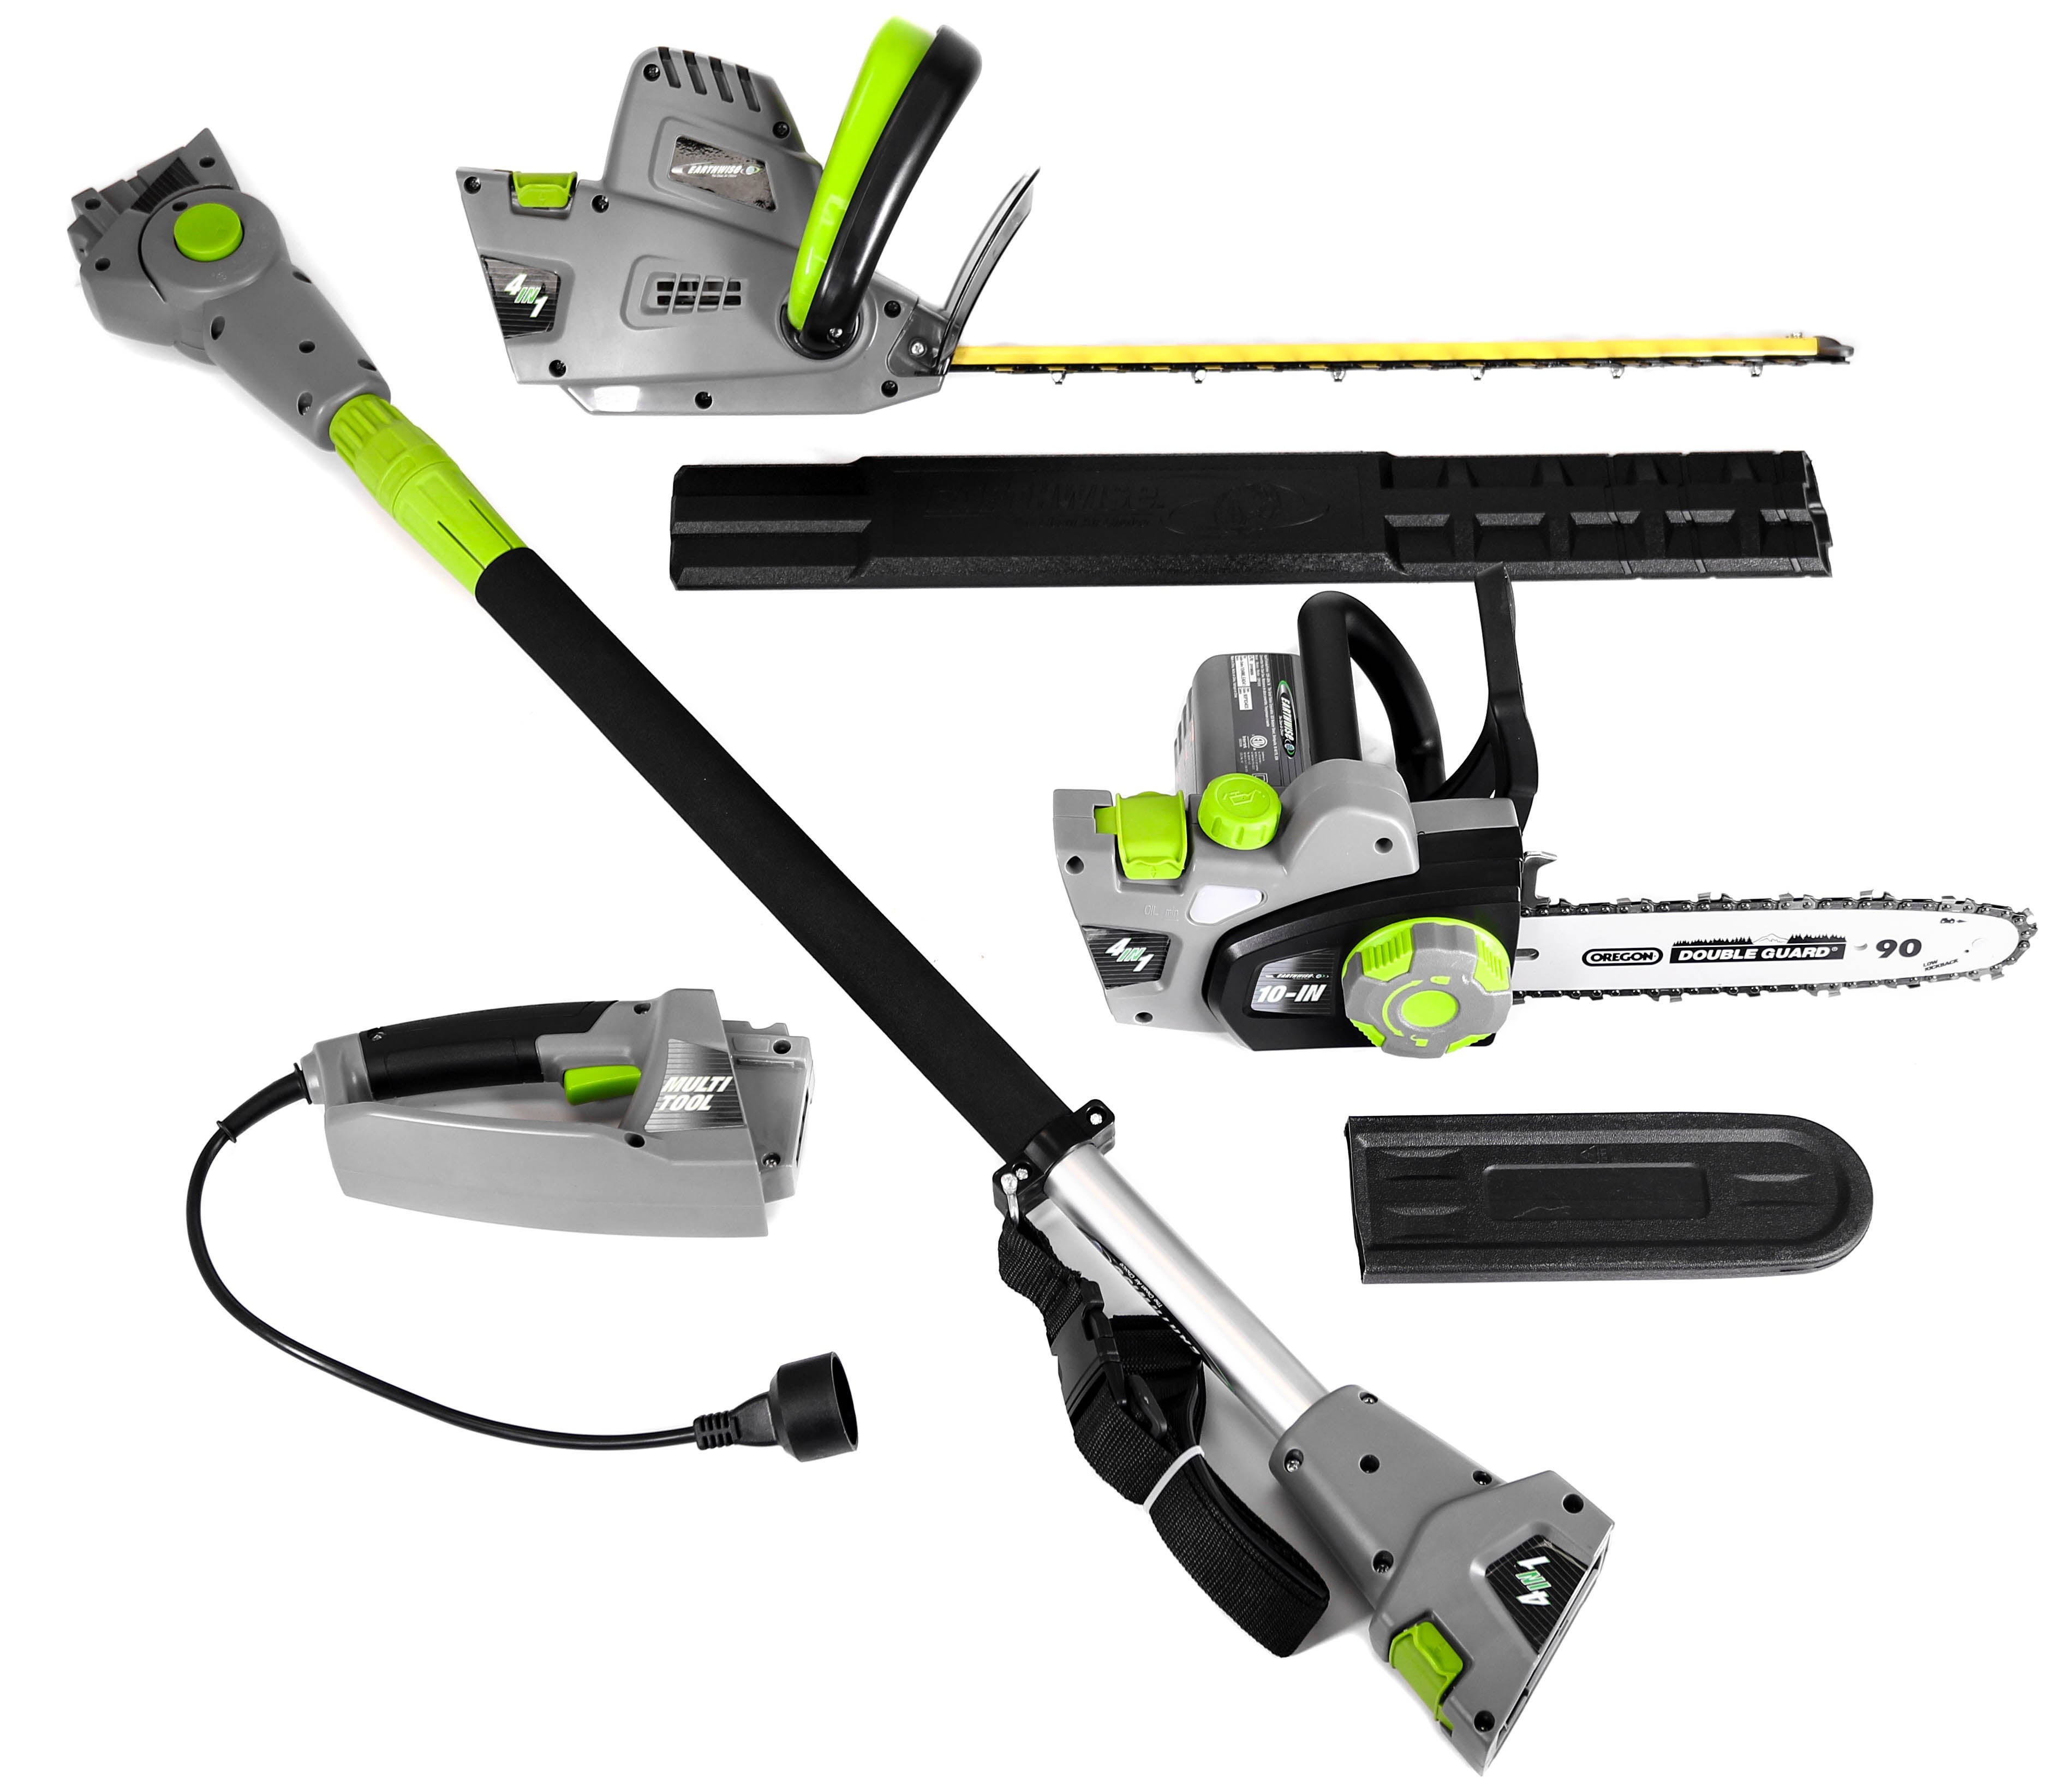 4-in-1 Multi-Tool - Pole & Handheld Hedge Trimmer/Pole & Handheld Chain Saw